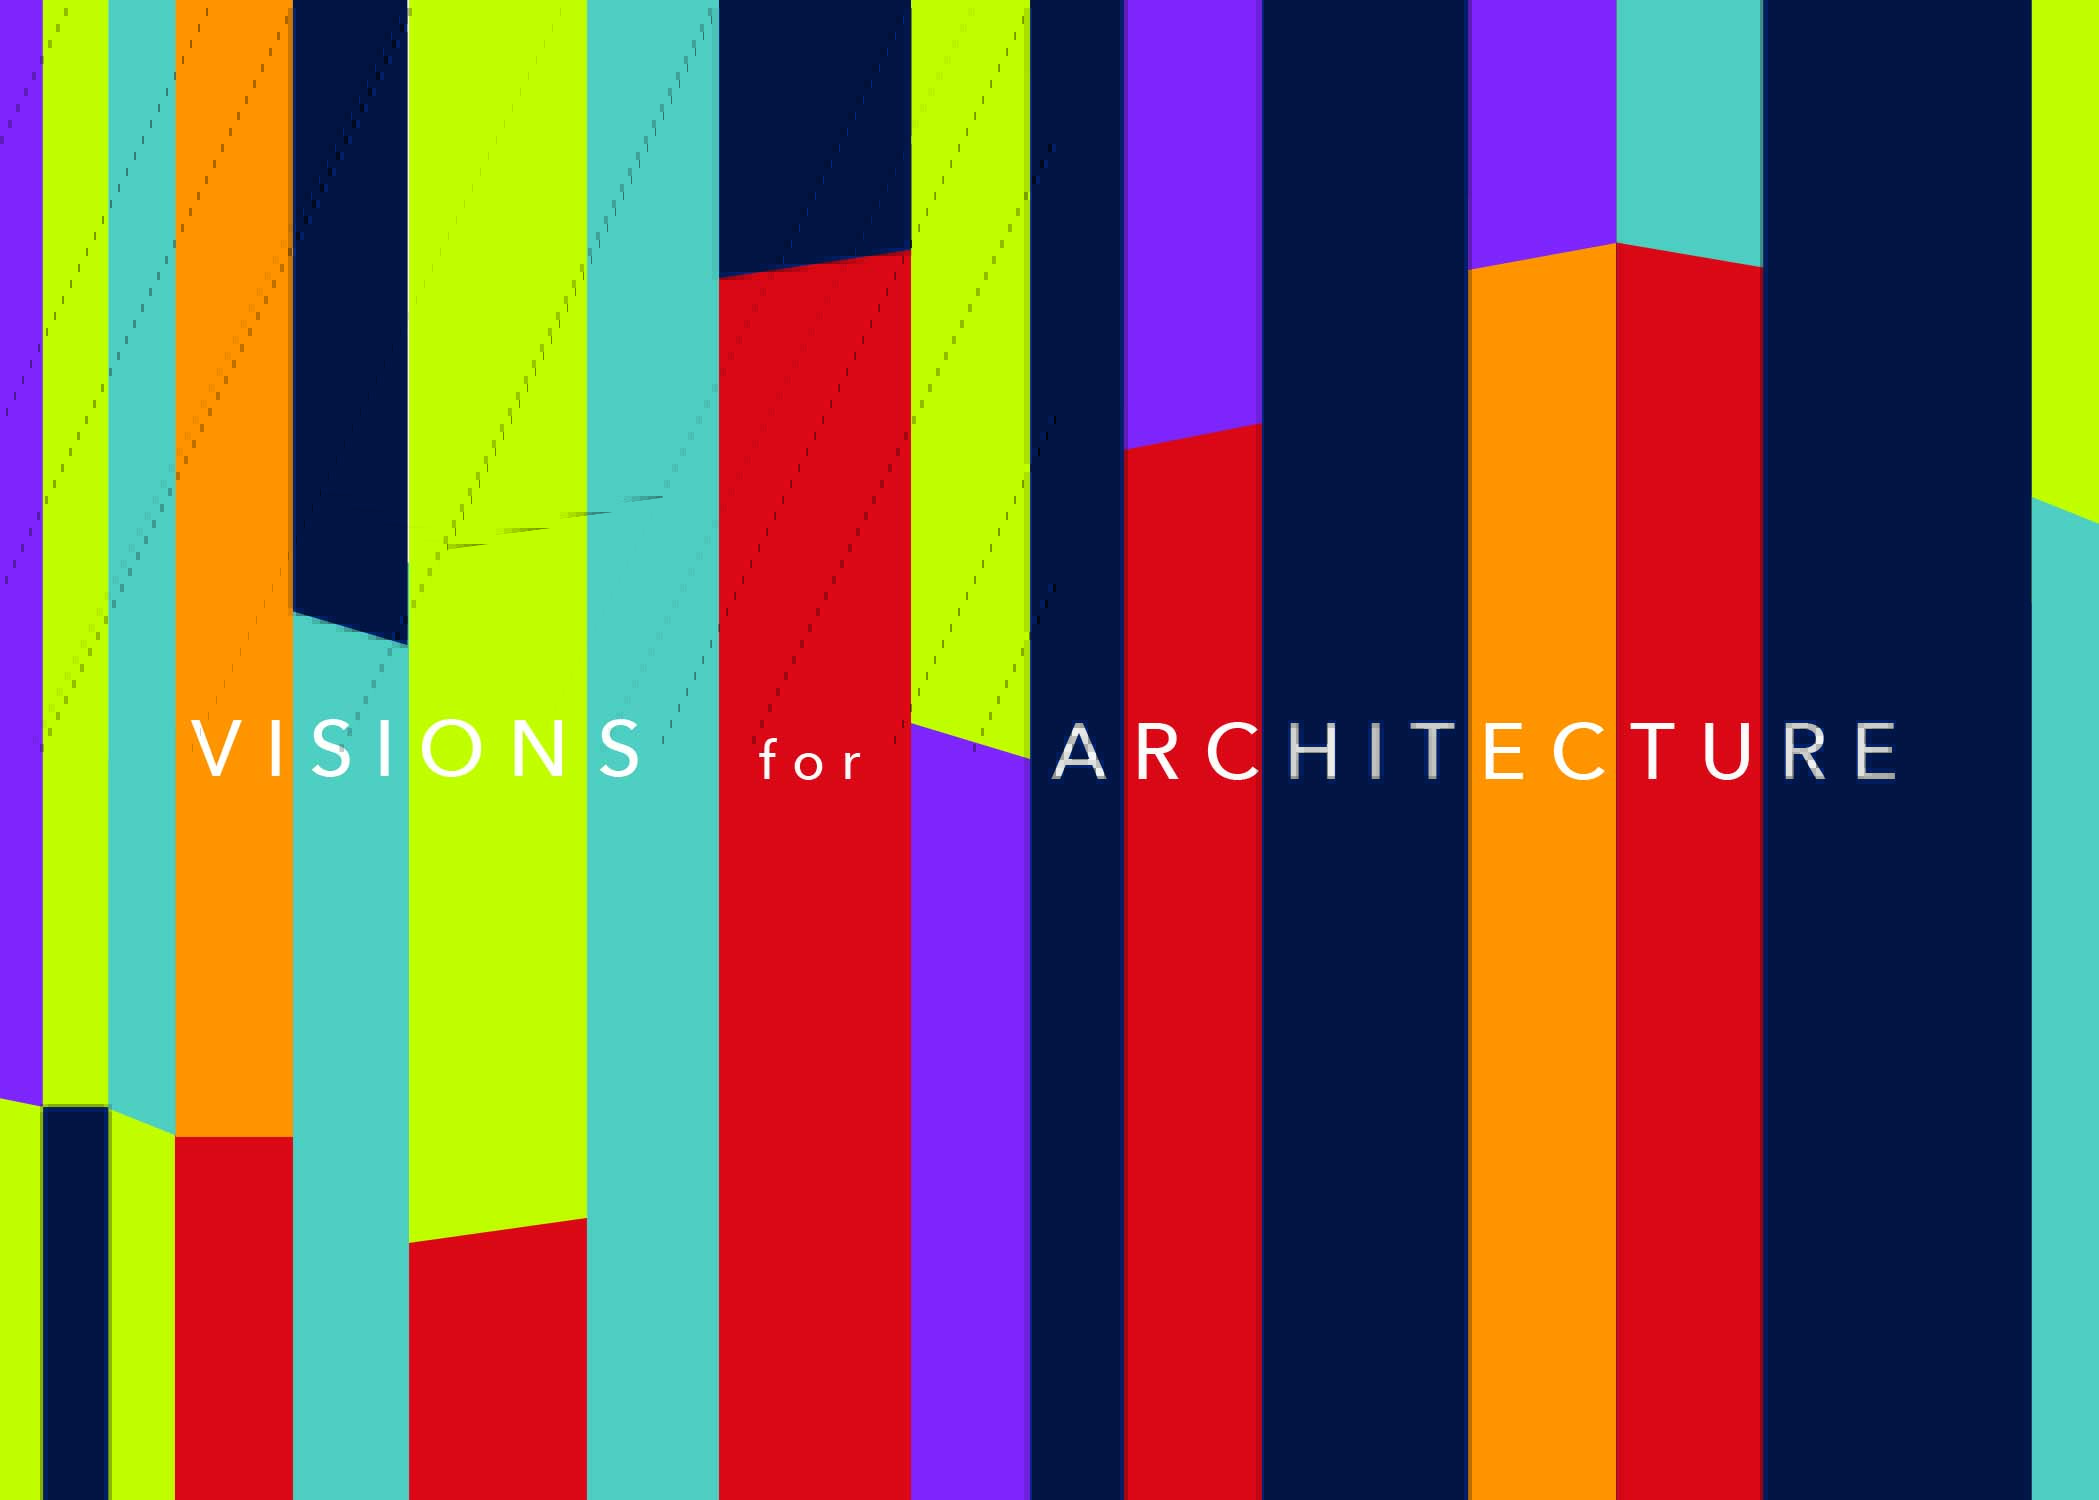 Visions for Architecture